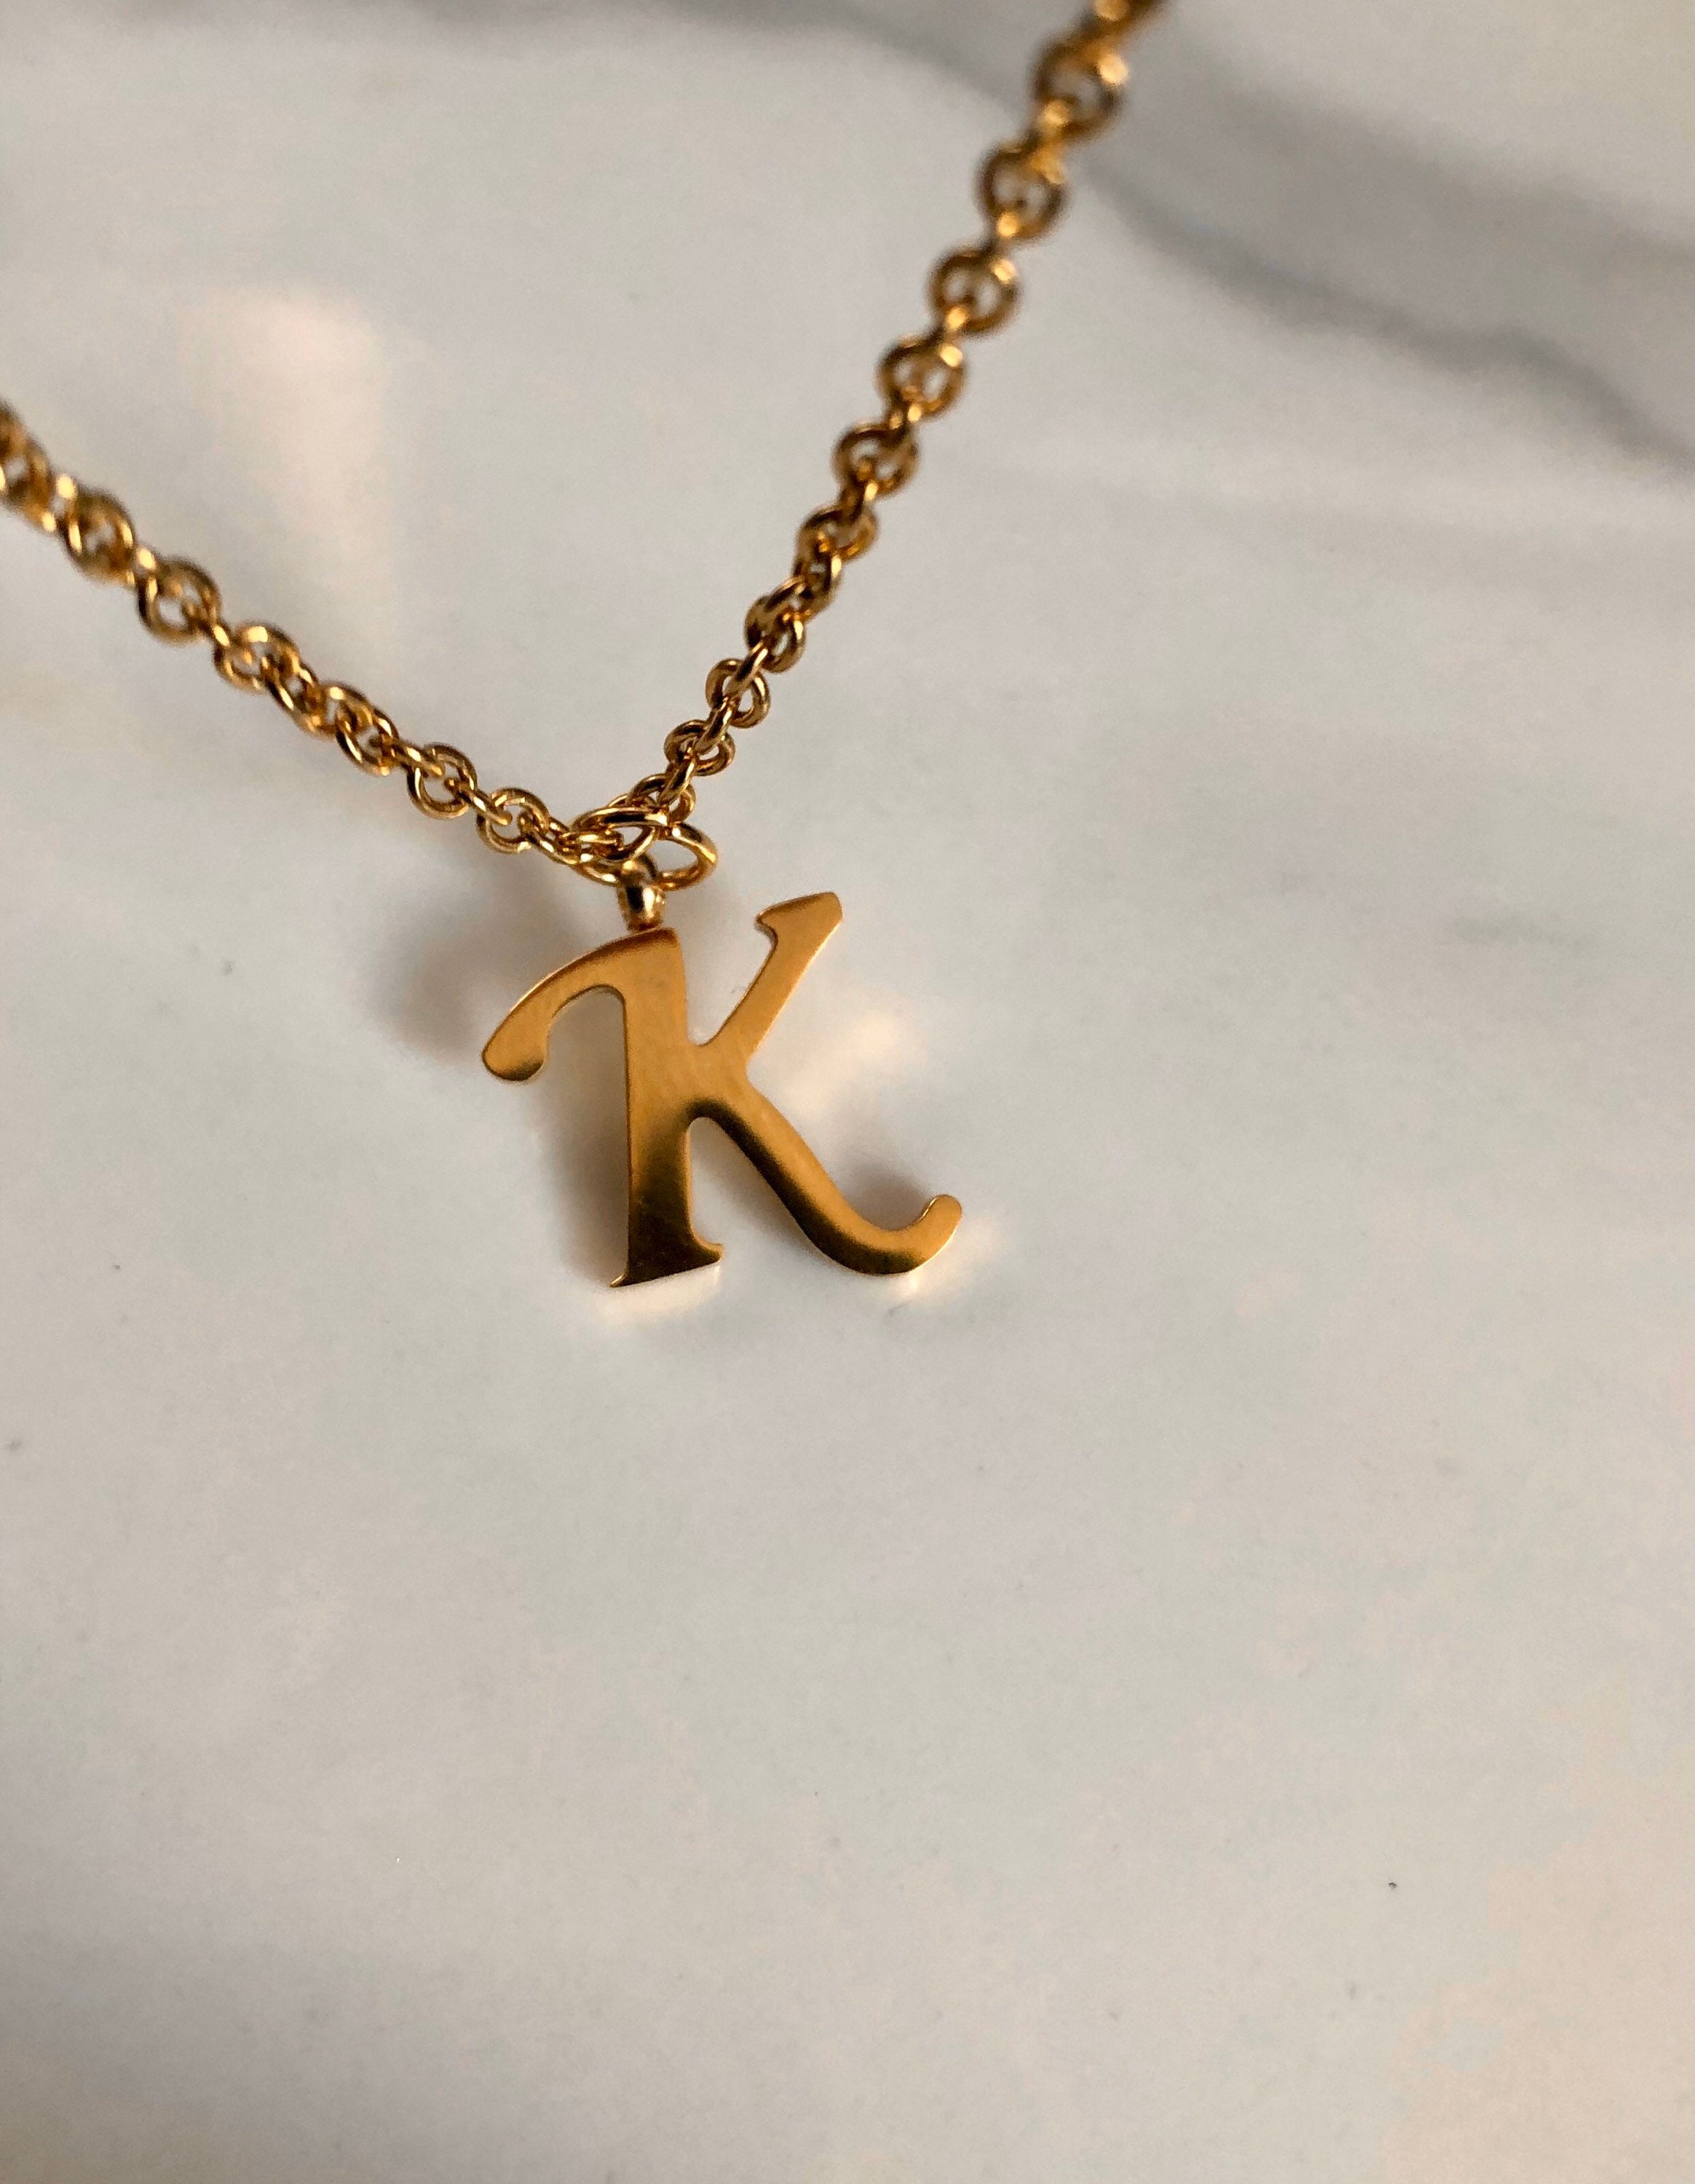 Bestyle Stainless Steel Initial Necklace Men Women Letter K Pendant Necklace  Love Name Statement Couple Necklace Chain for Boys Girls - Gold -  Walmart.com